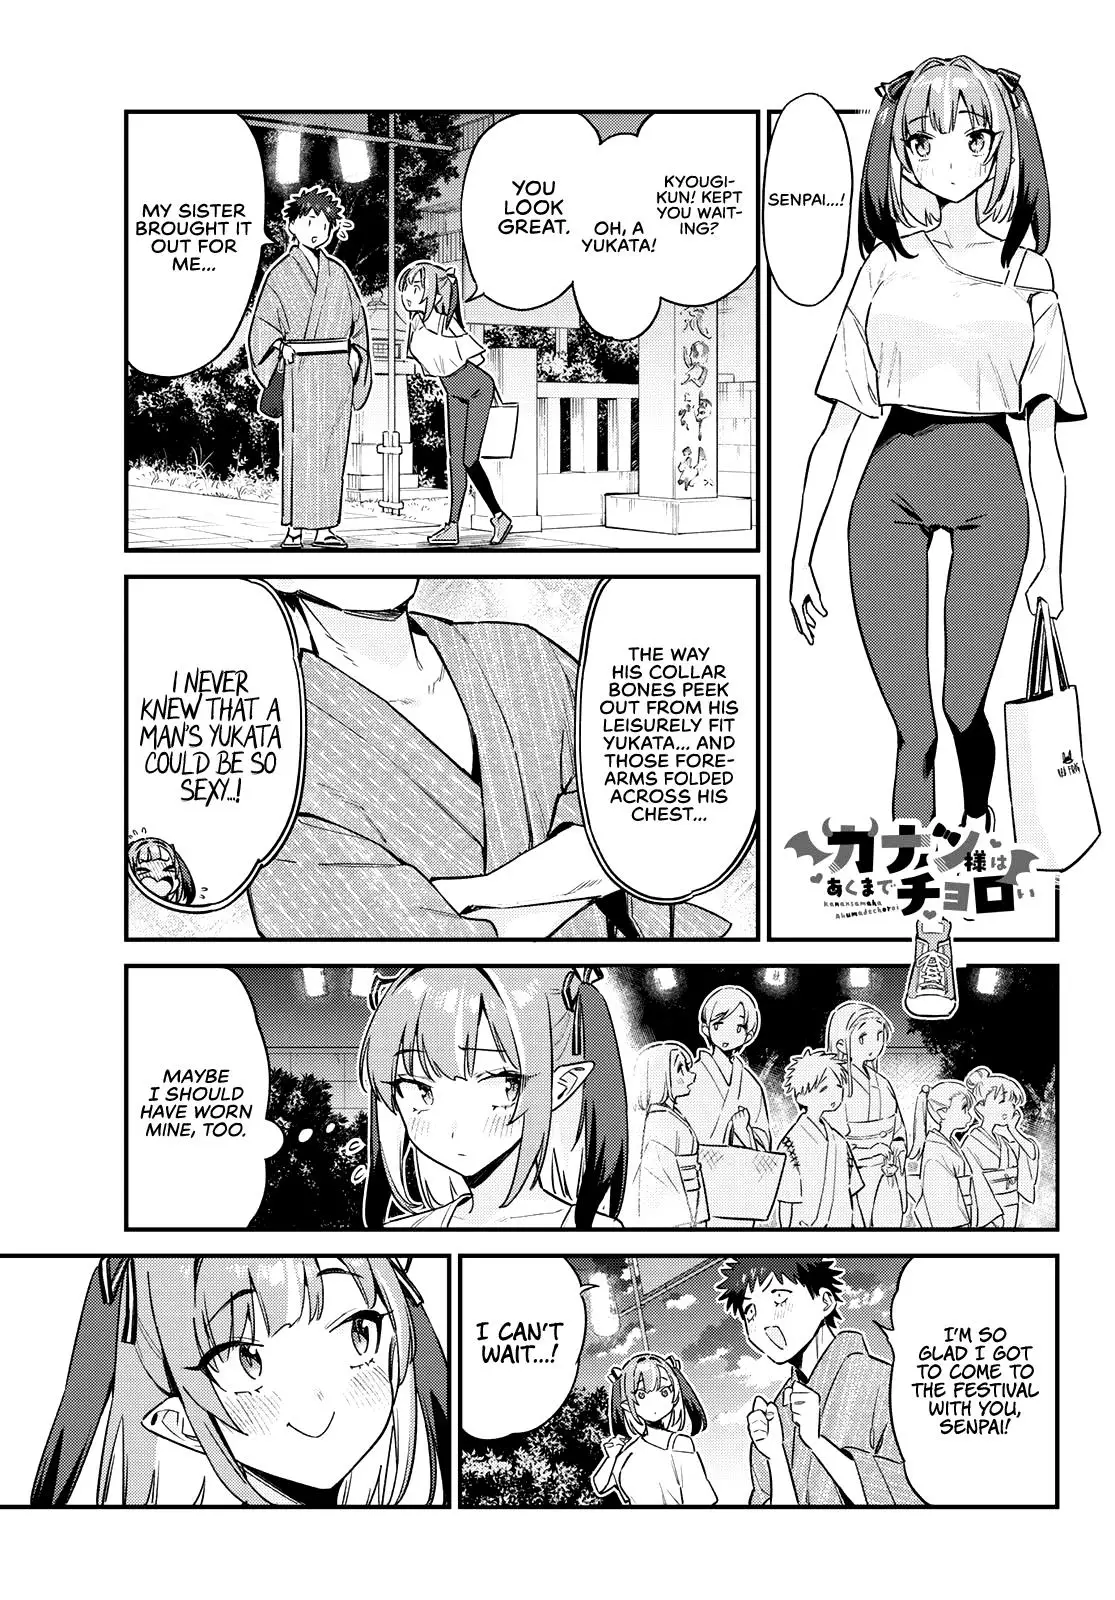 Kanan-Sama Is Easy As Hell! - 66 page 2-24571427